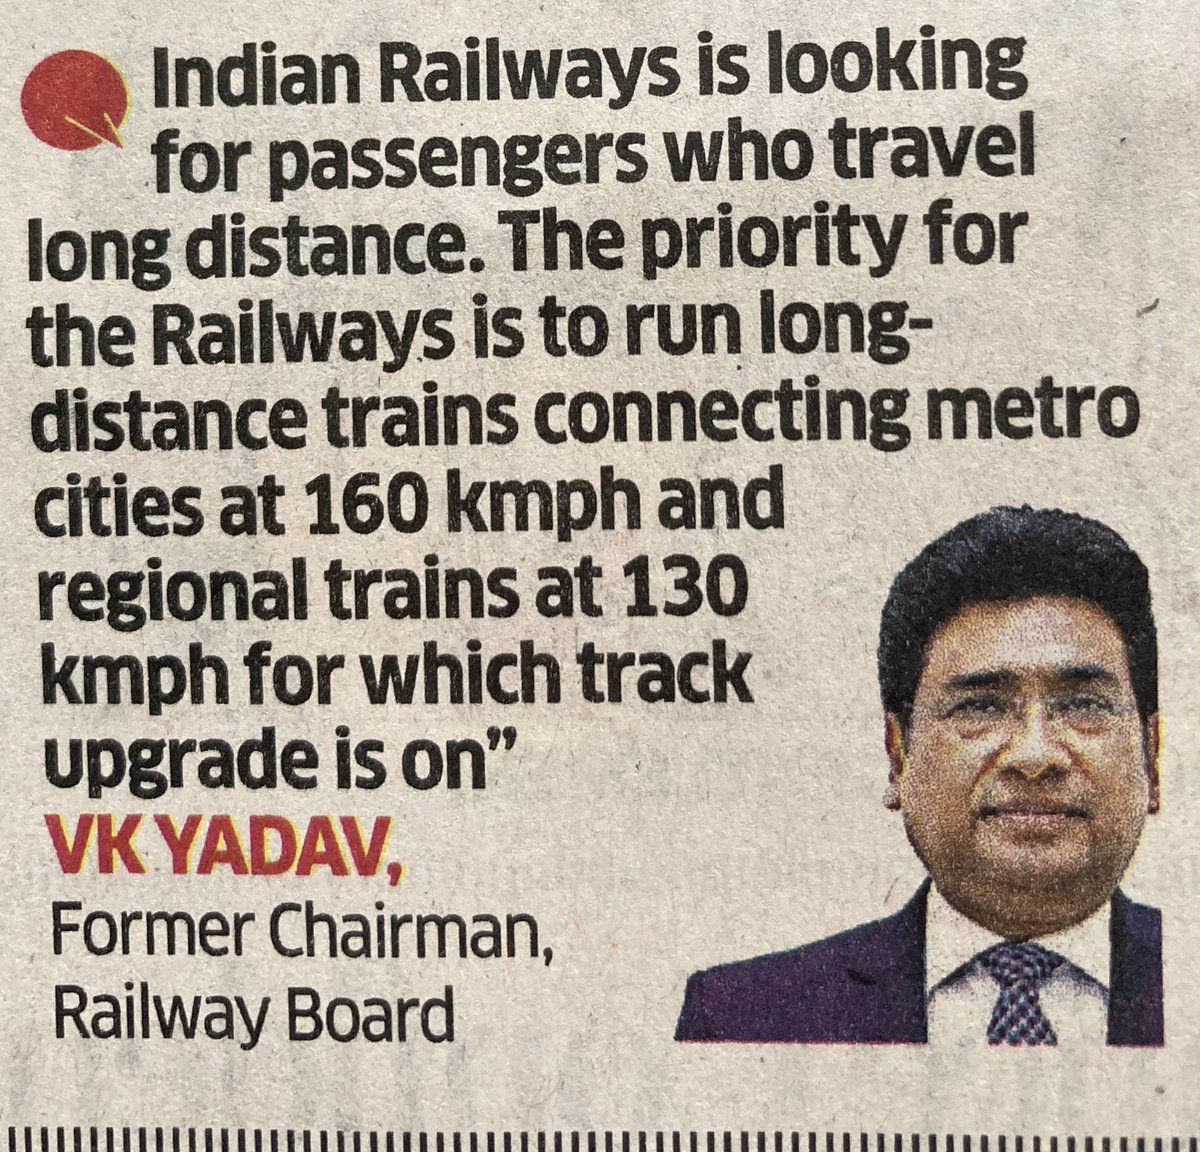 “.@RailMinIndia is looking for passengers who travel long distance. The priority for the Railways is to run long-distance trains connecting metro cities at 160 kmph & regional trains at 130 kmph for which track upgrade is on” — Former Railway Board chairman @v_k_yadava tells me